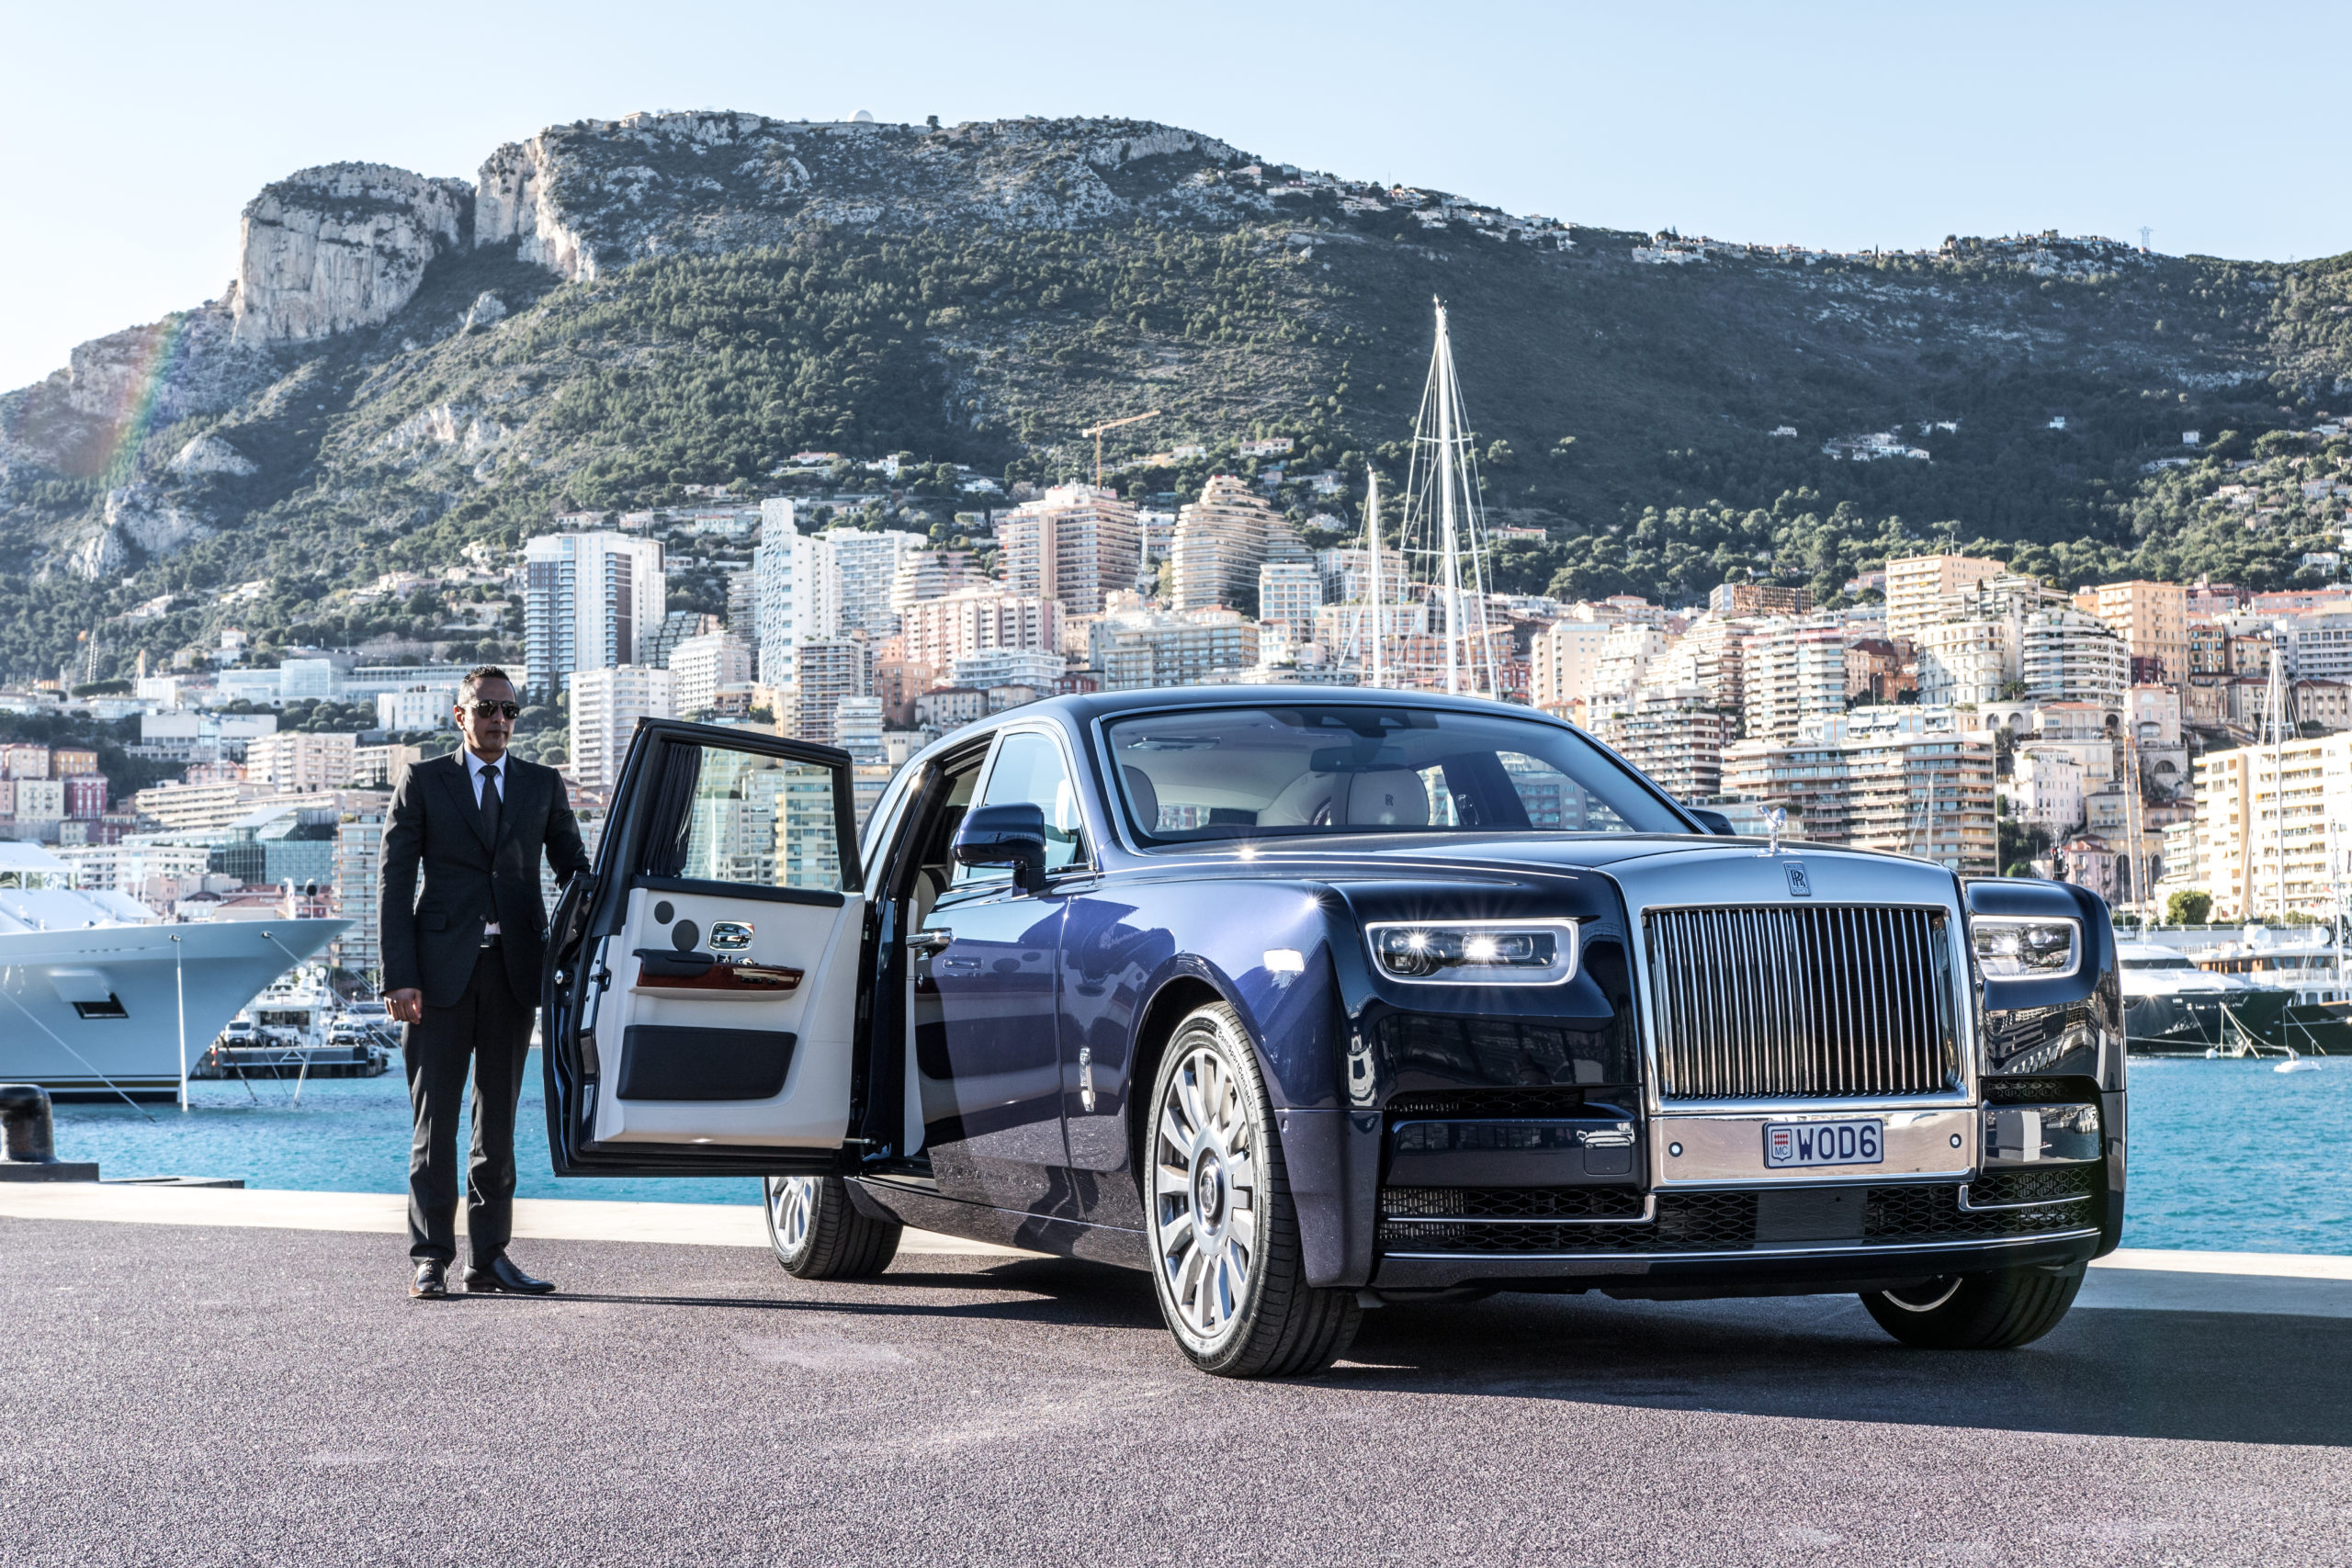 Pinduoduo offered Rolls-Royce vehicles at USD 187,000 discount